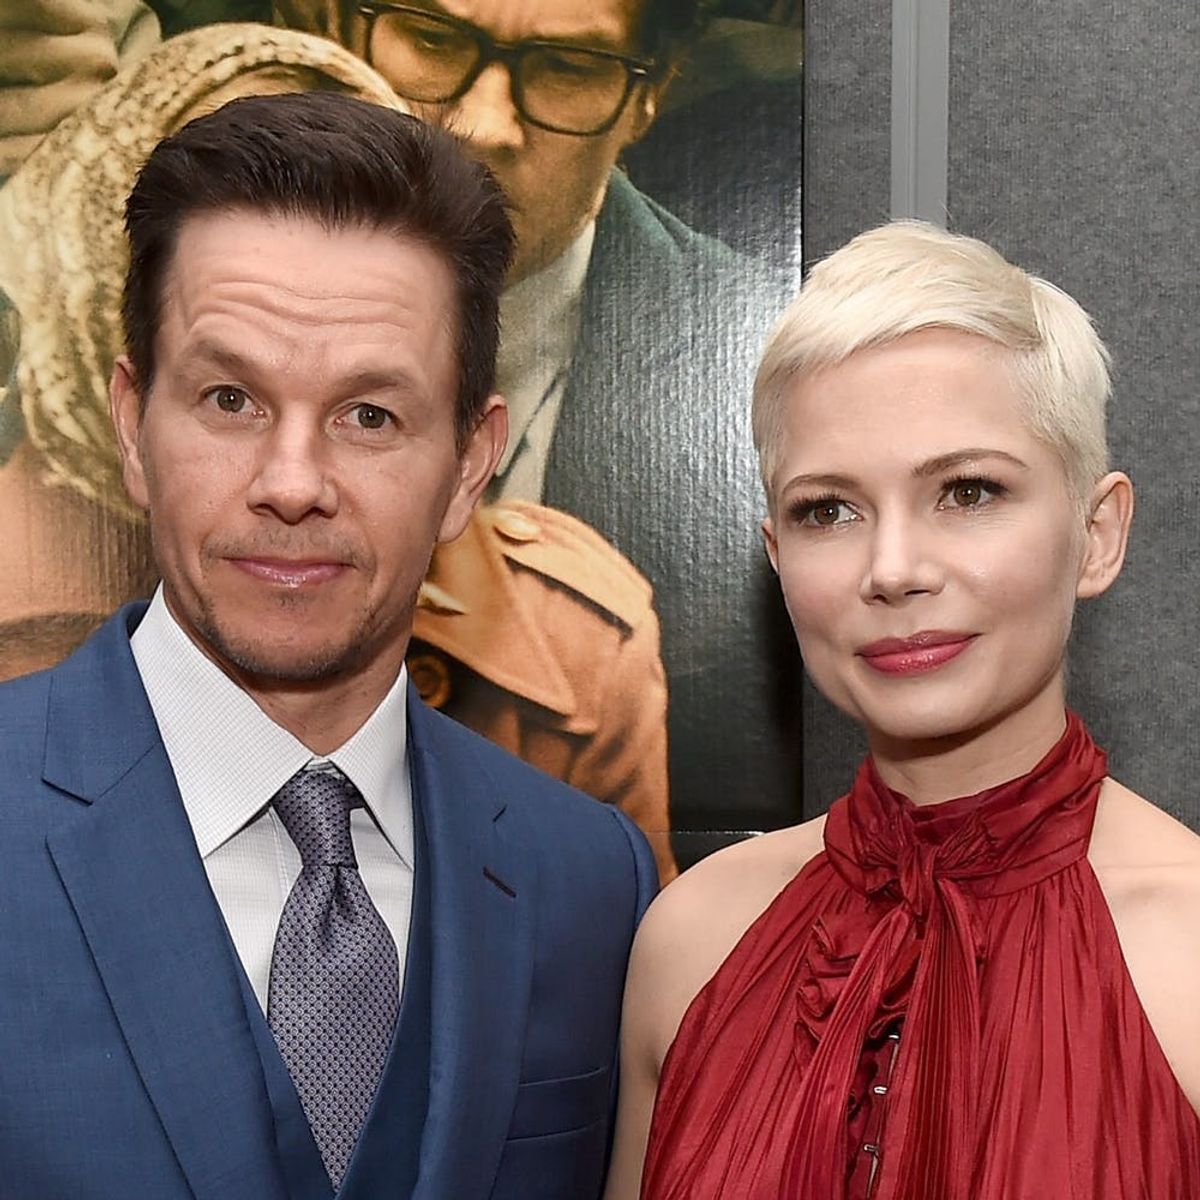 Mark Wahlberg Donates $1.5 Million to the TIME’S UP Movement in Michelle Williams’ Name